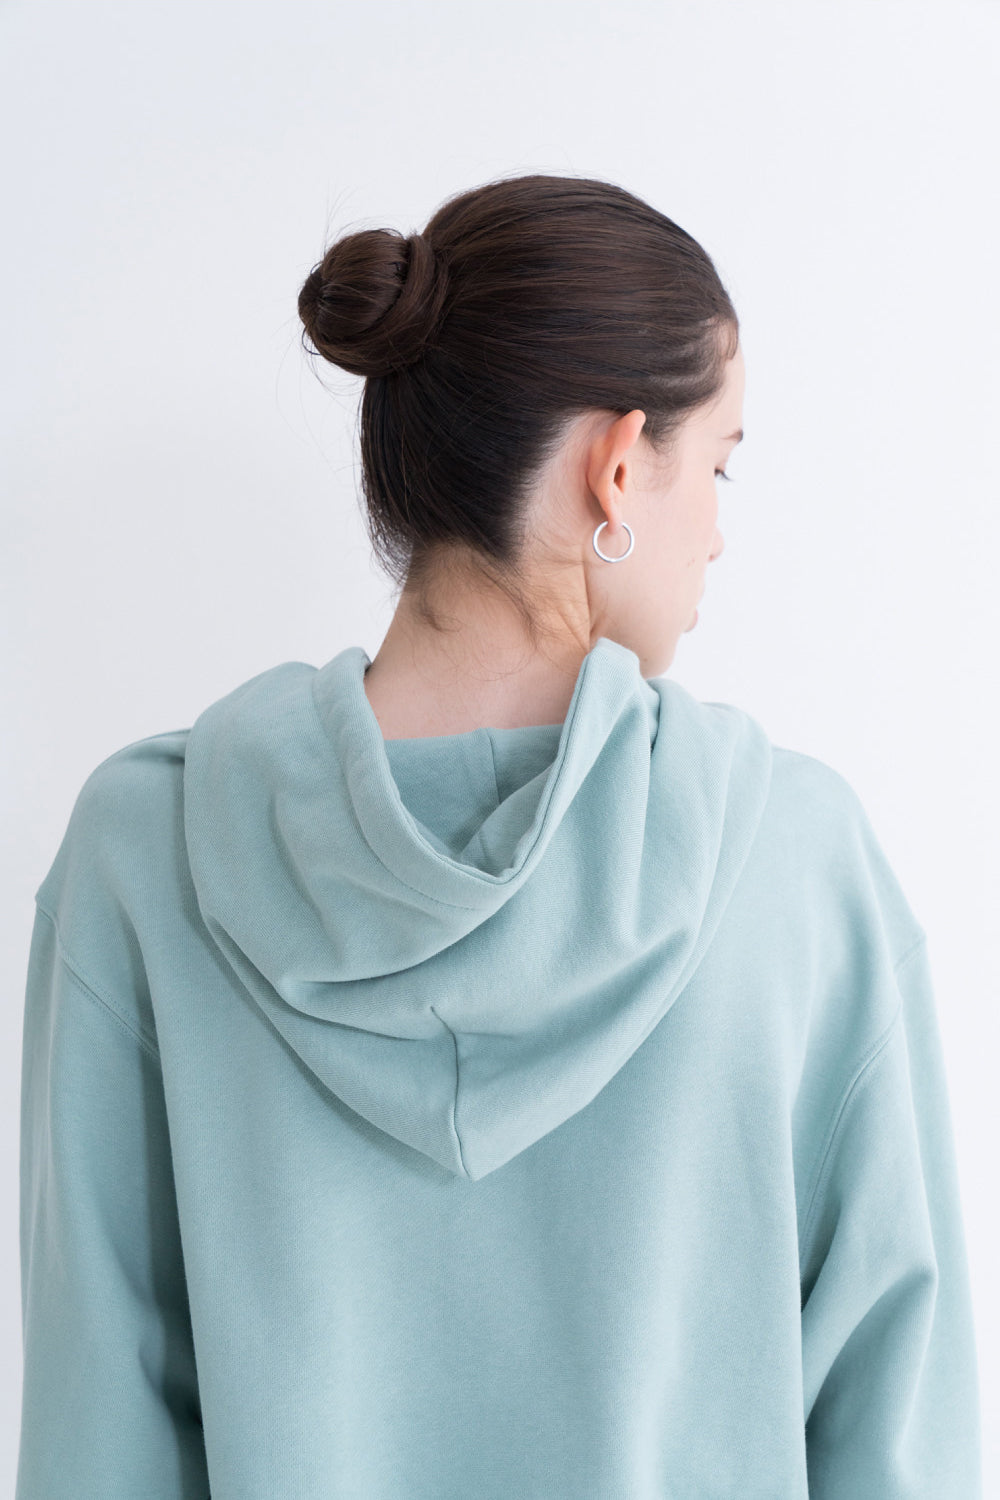 NOTA Signal String Hood Mint Modest Women Oversized Sweater With Front Pockets and Adjustable Drawstring Hoodie 100% Cotton